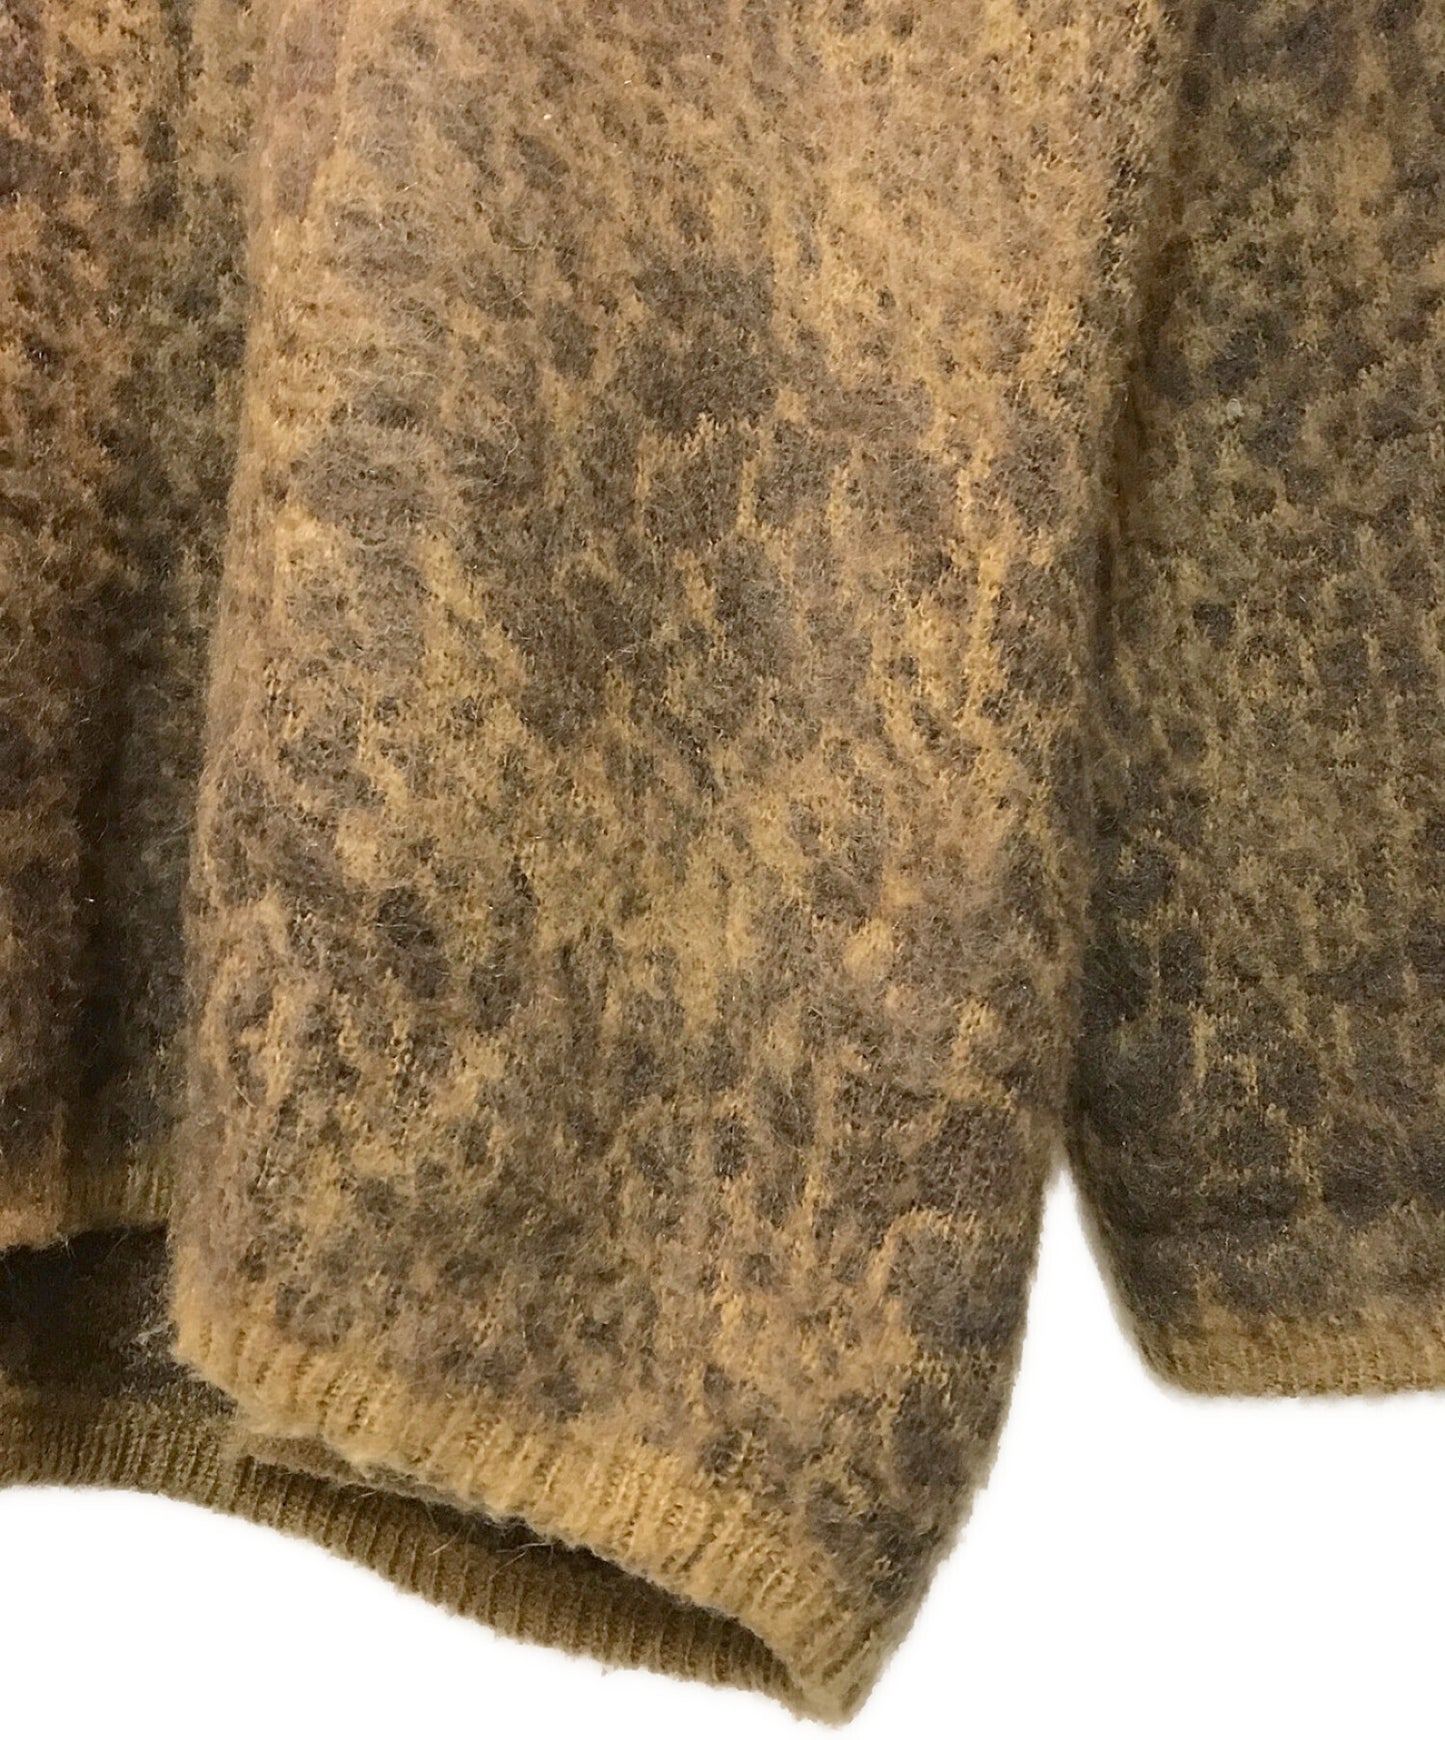 [Pre-owned] NEIGHBORHOOD MOHAIR CARDIGAN 212funh-knm04